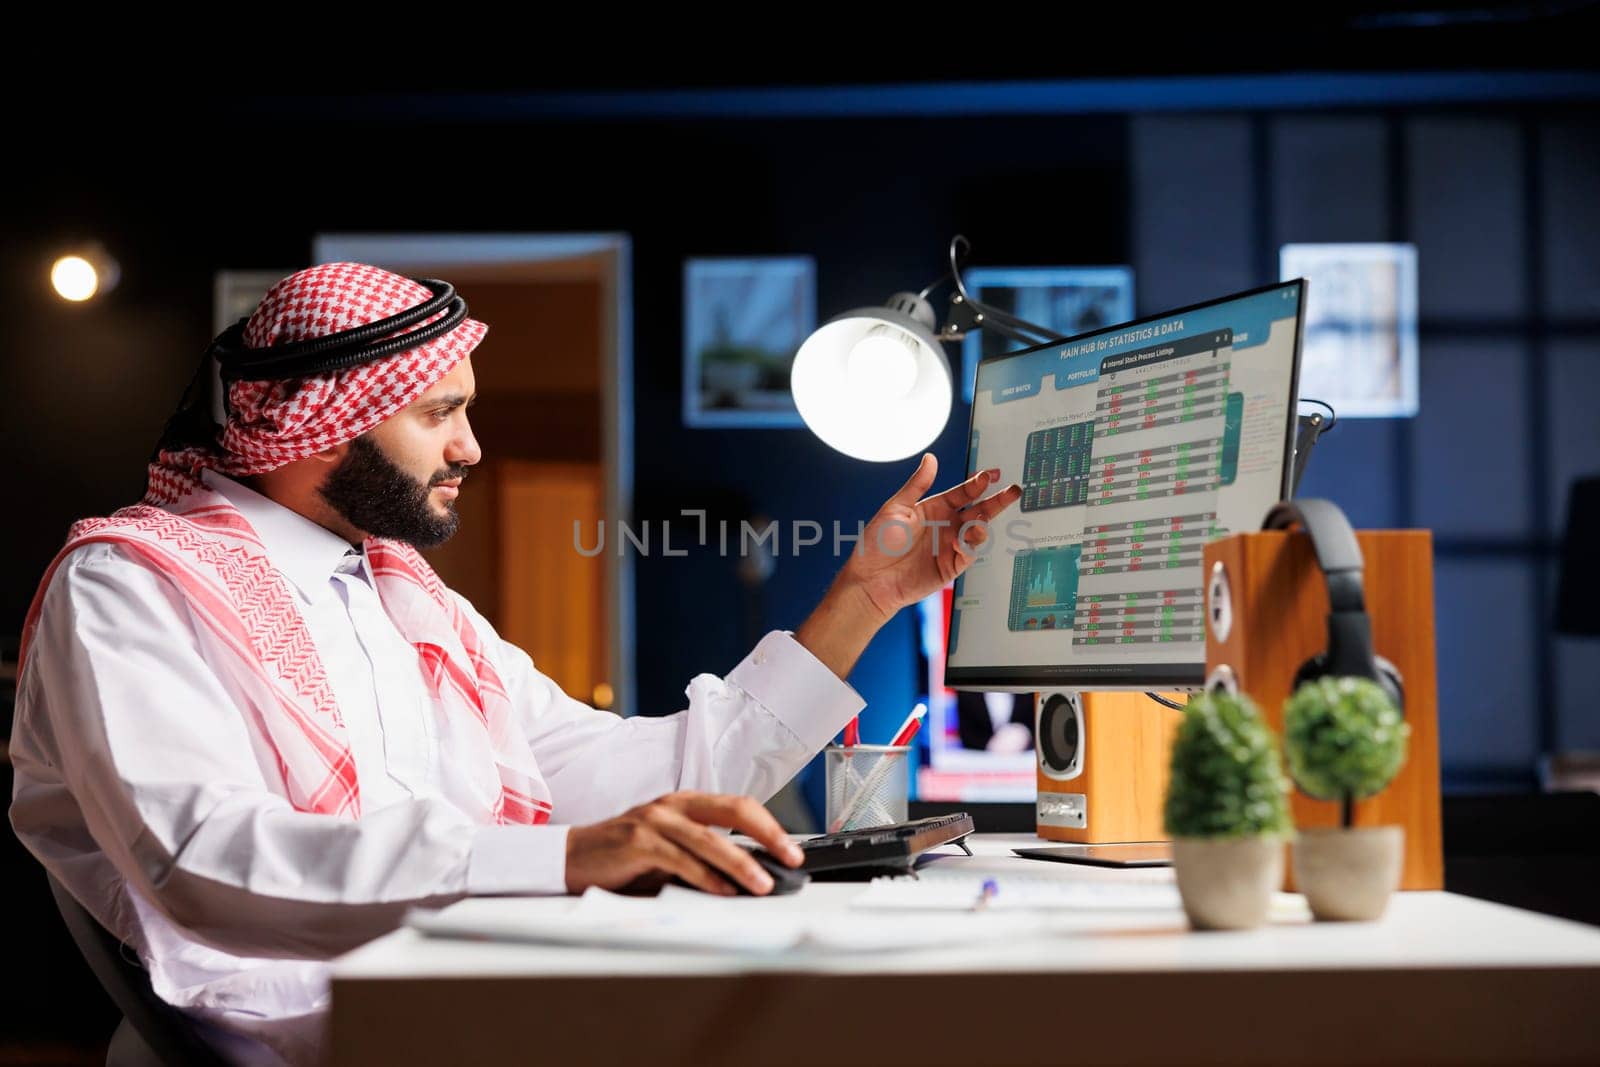 Handsome male professional focusing on work in a well-organized office space, surrounded by technology and paperwork. Muslim man closely examining the data research on pc monitor.